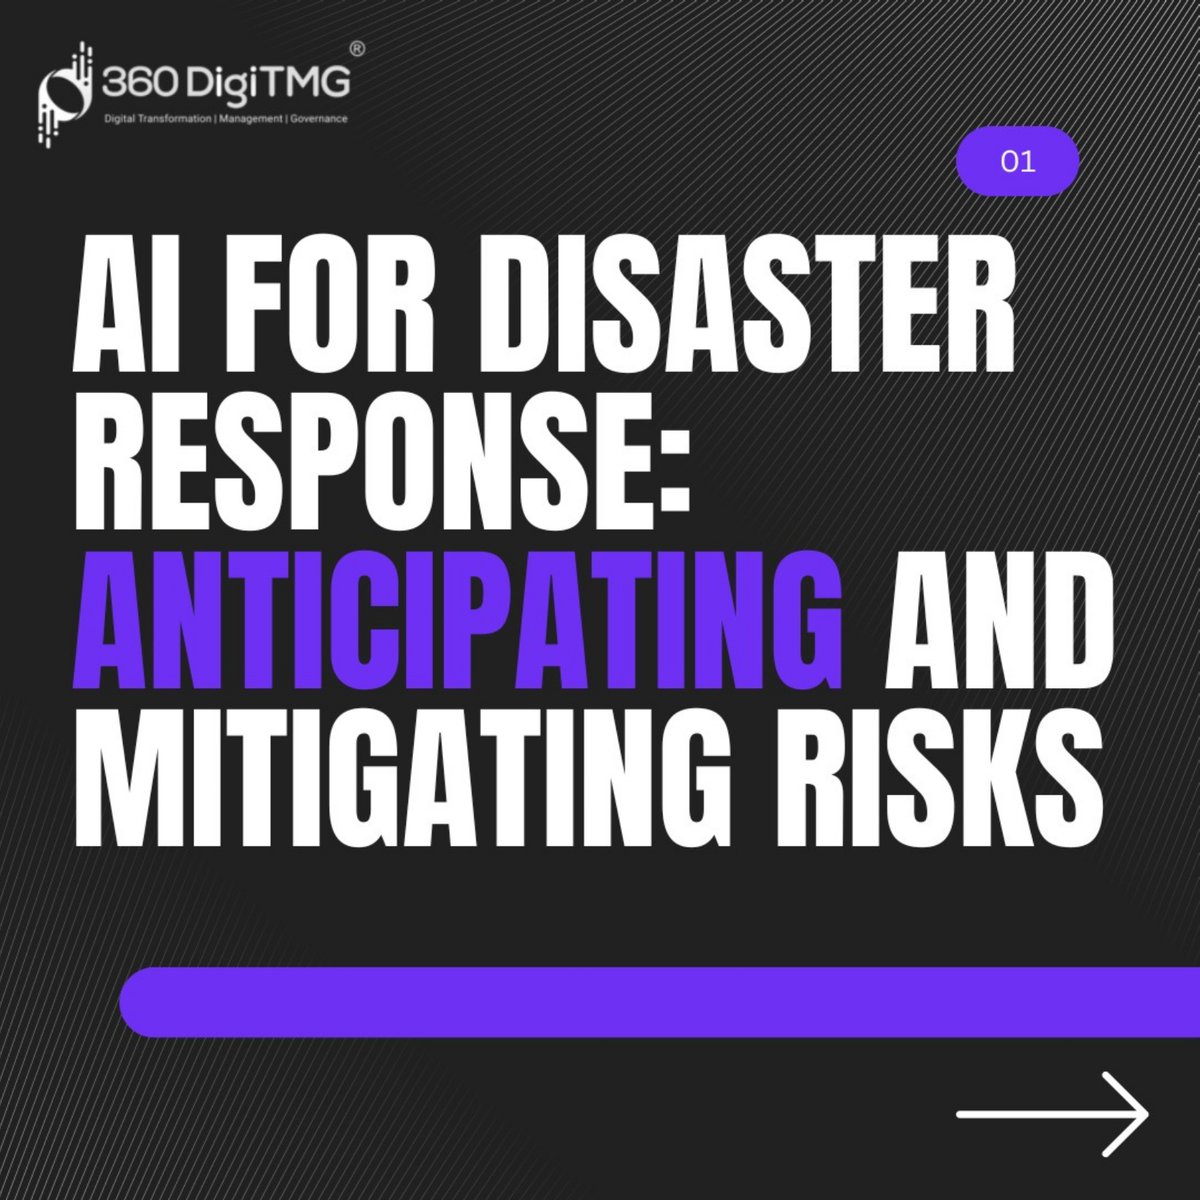 Empowering disaster response with AI: Predicting and preemptively addressing risks to minimize impact.

#AI #HumanIntelligence #NeuralNetworks #Technology #Innovation #FutureTech #360DigiTMGmalaysia (1/9)